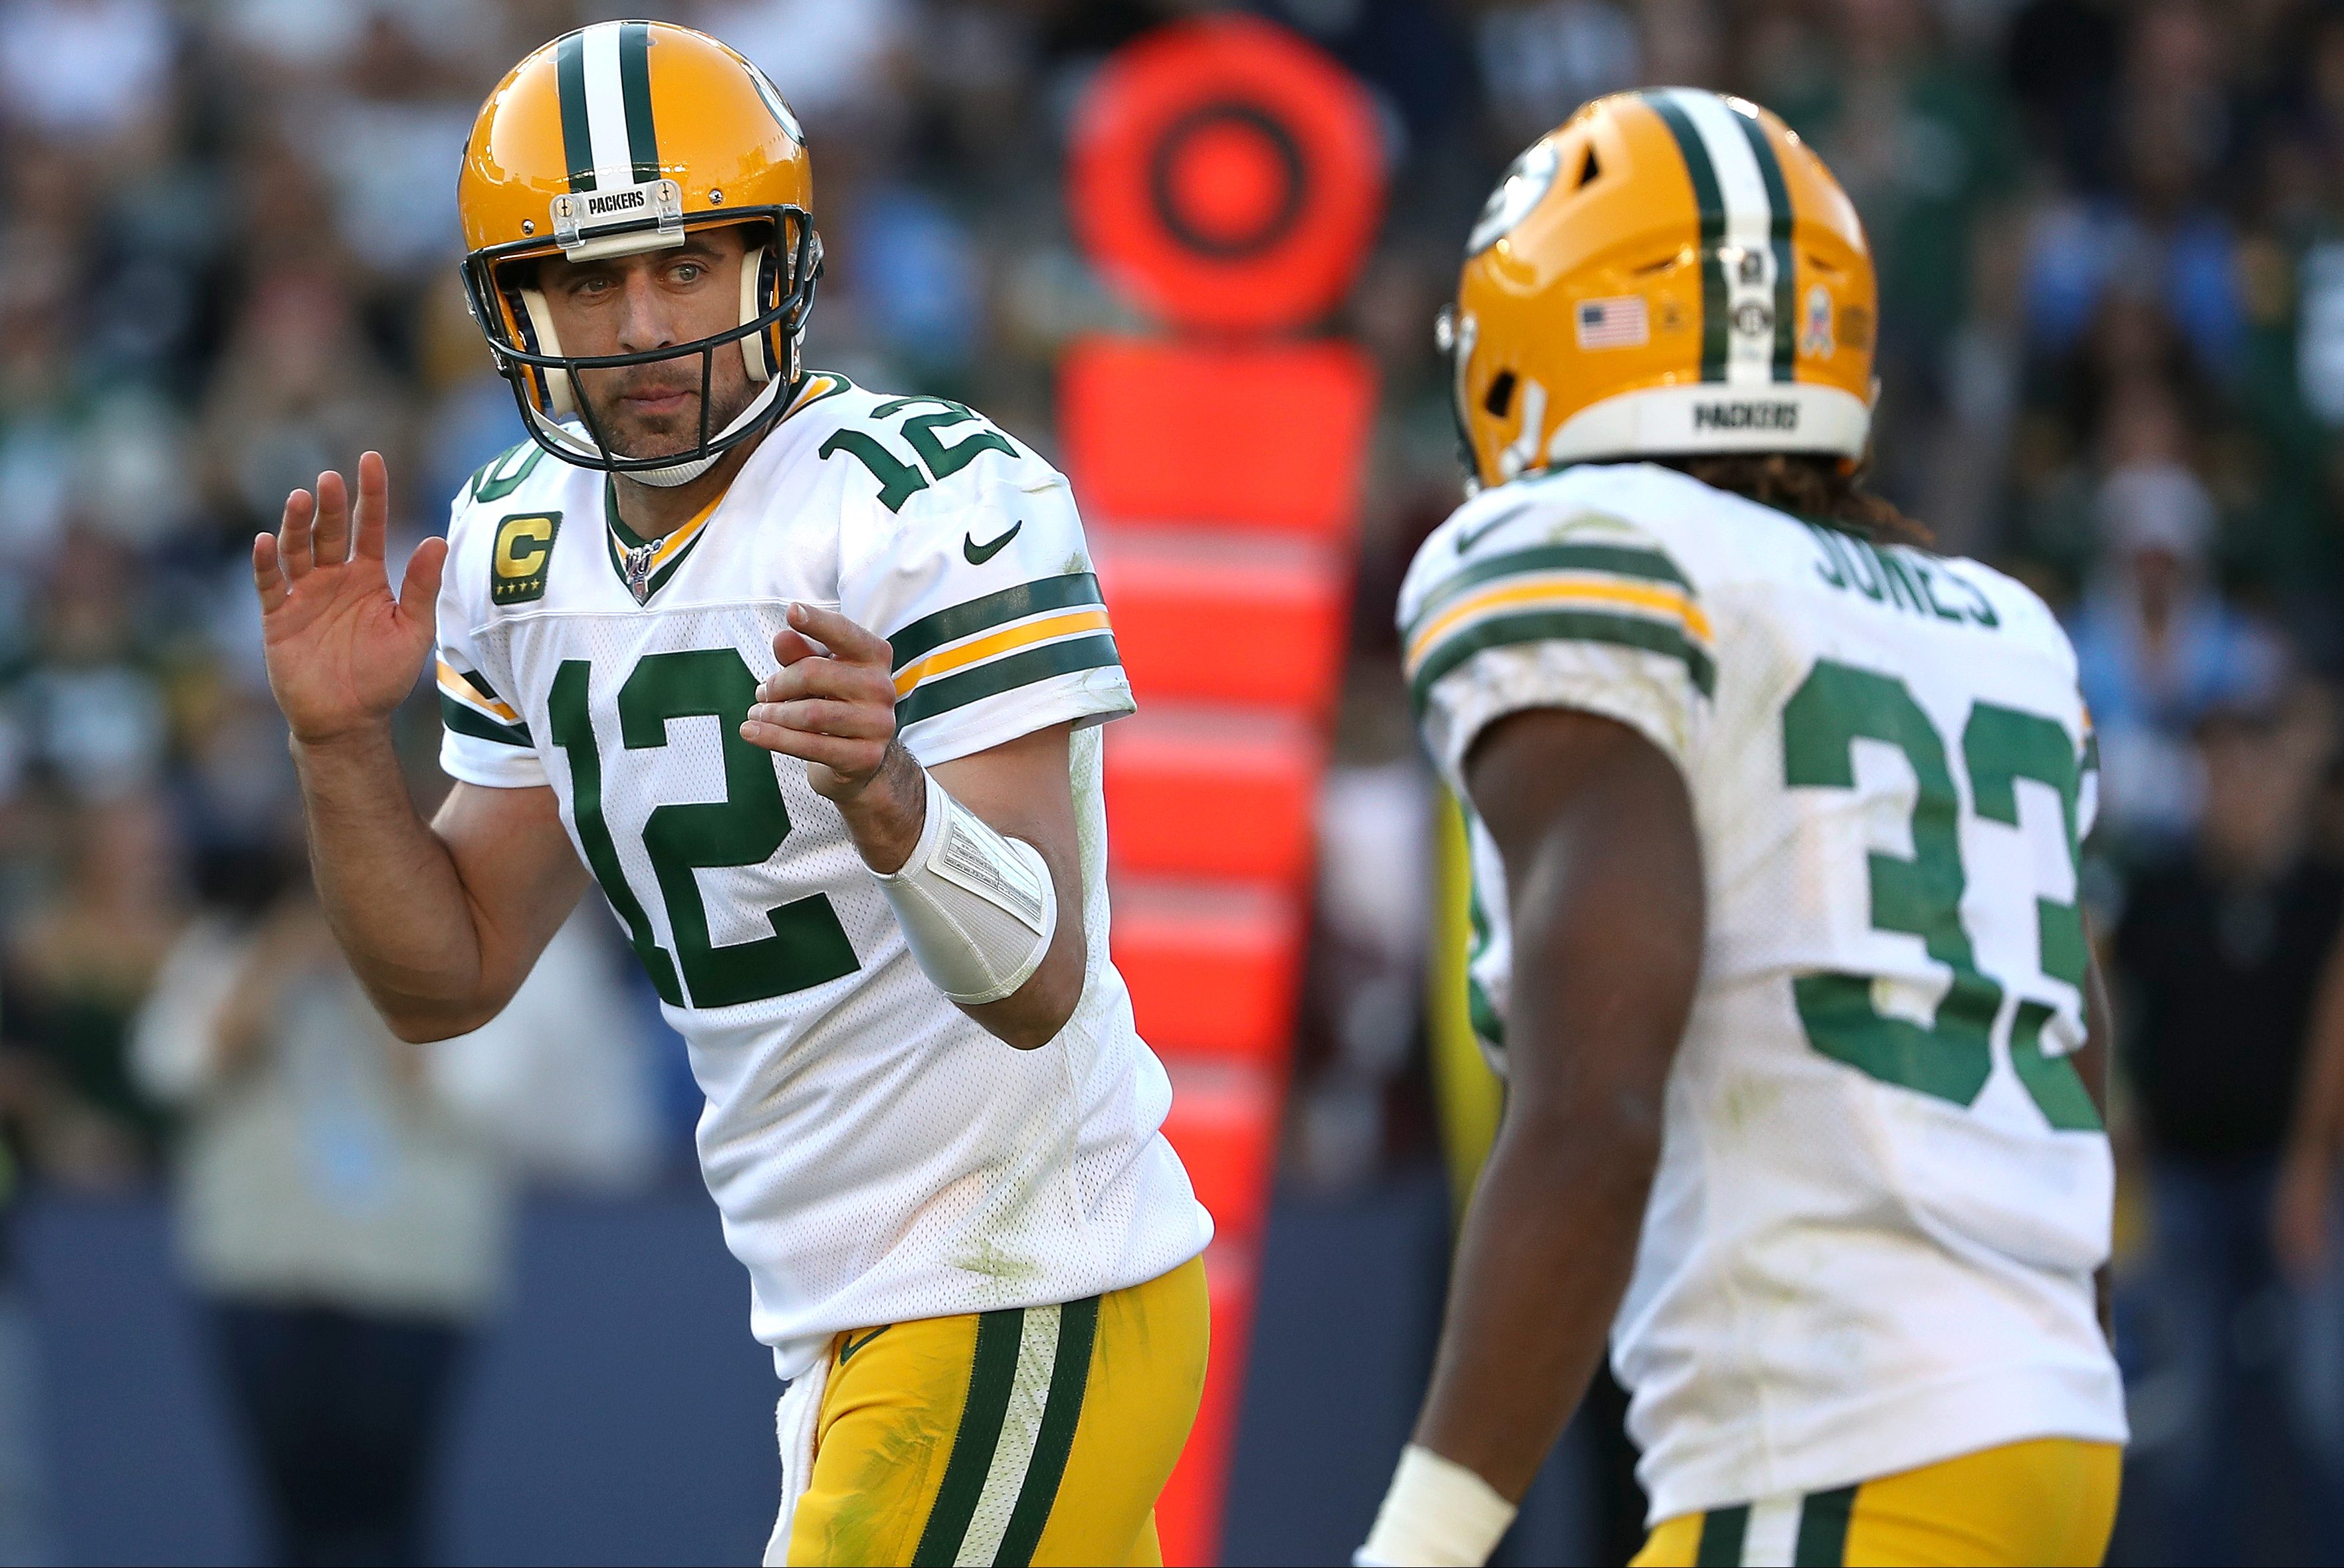 Panthers vs Packers Live Stream How to Watch Online